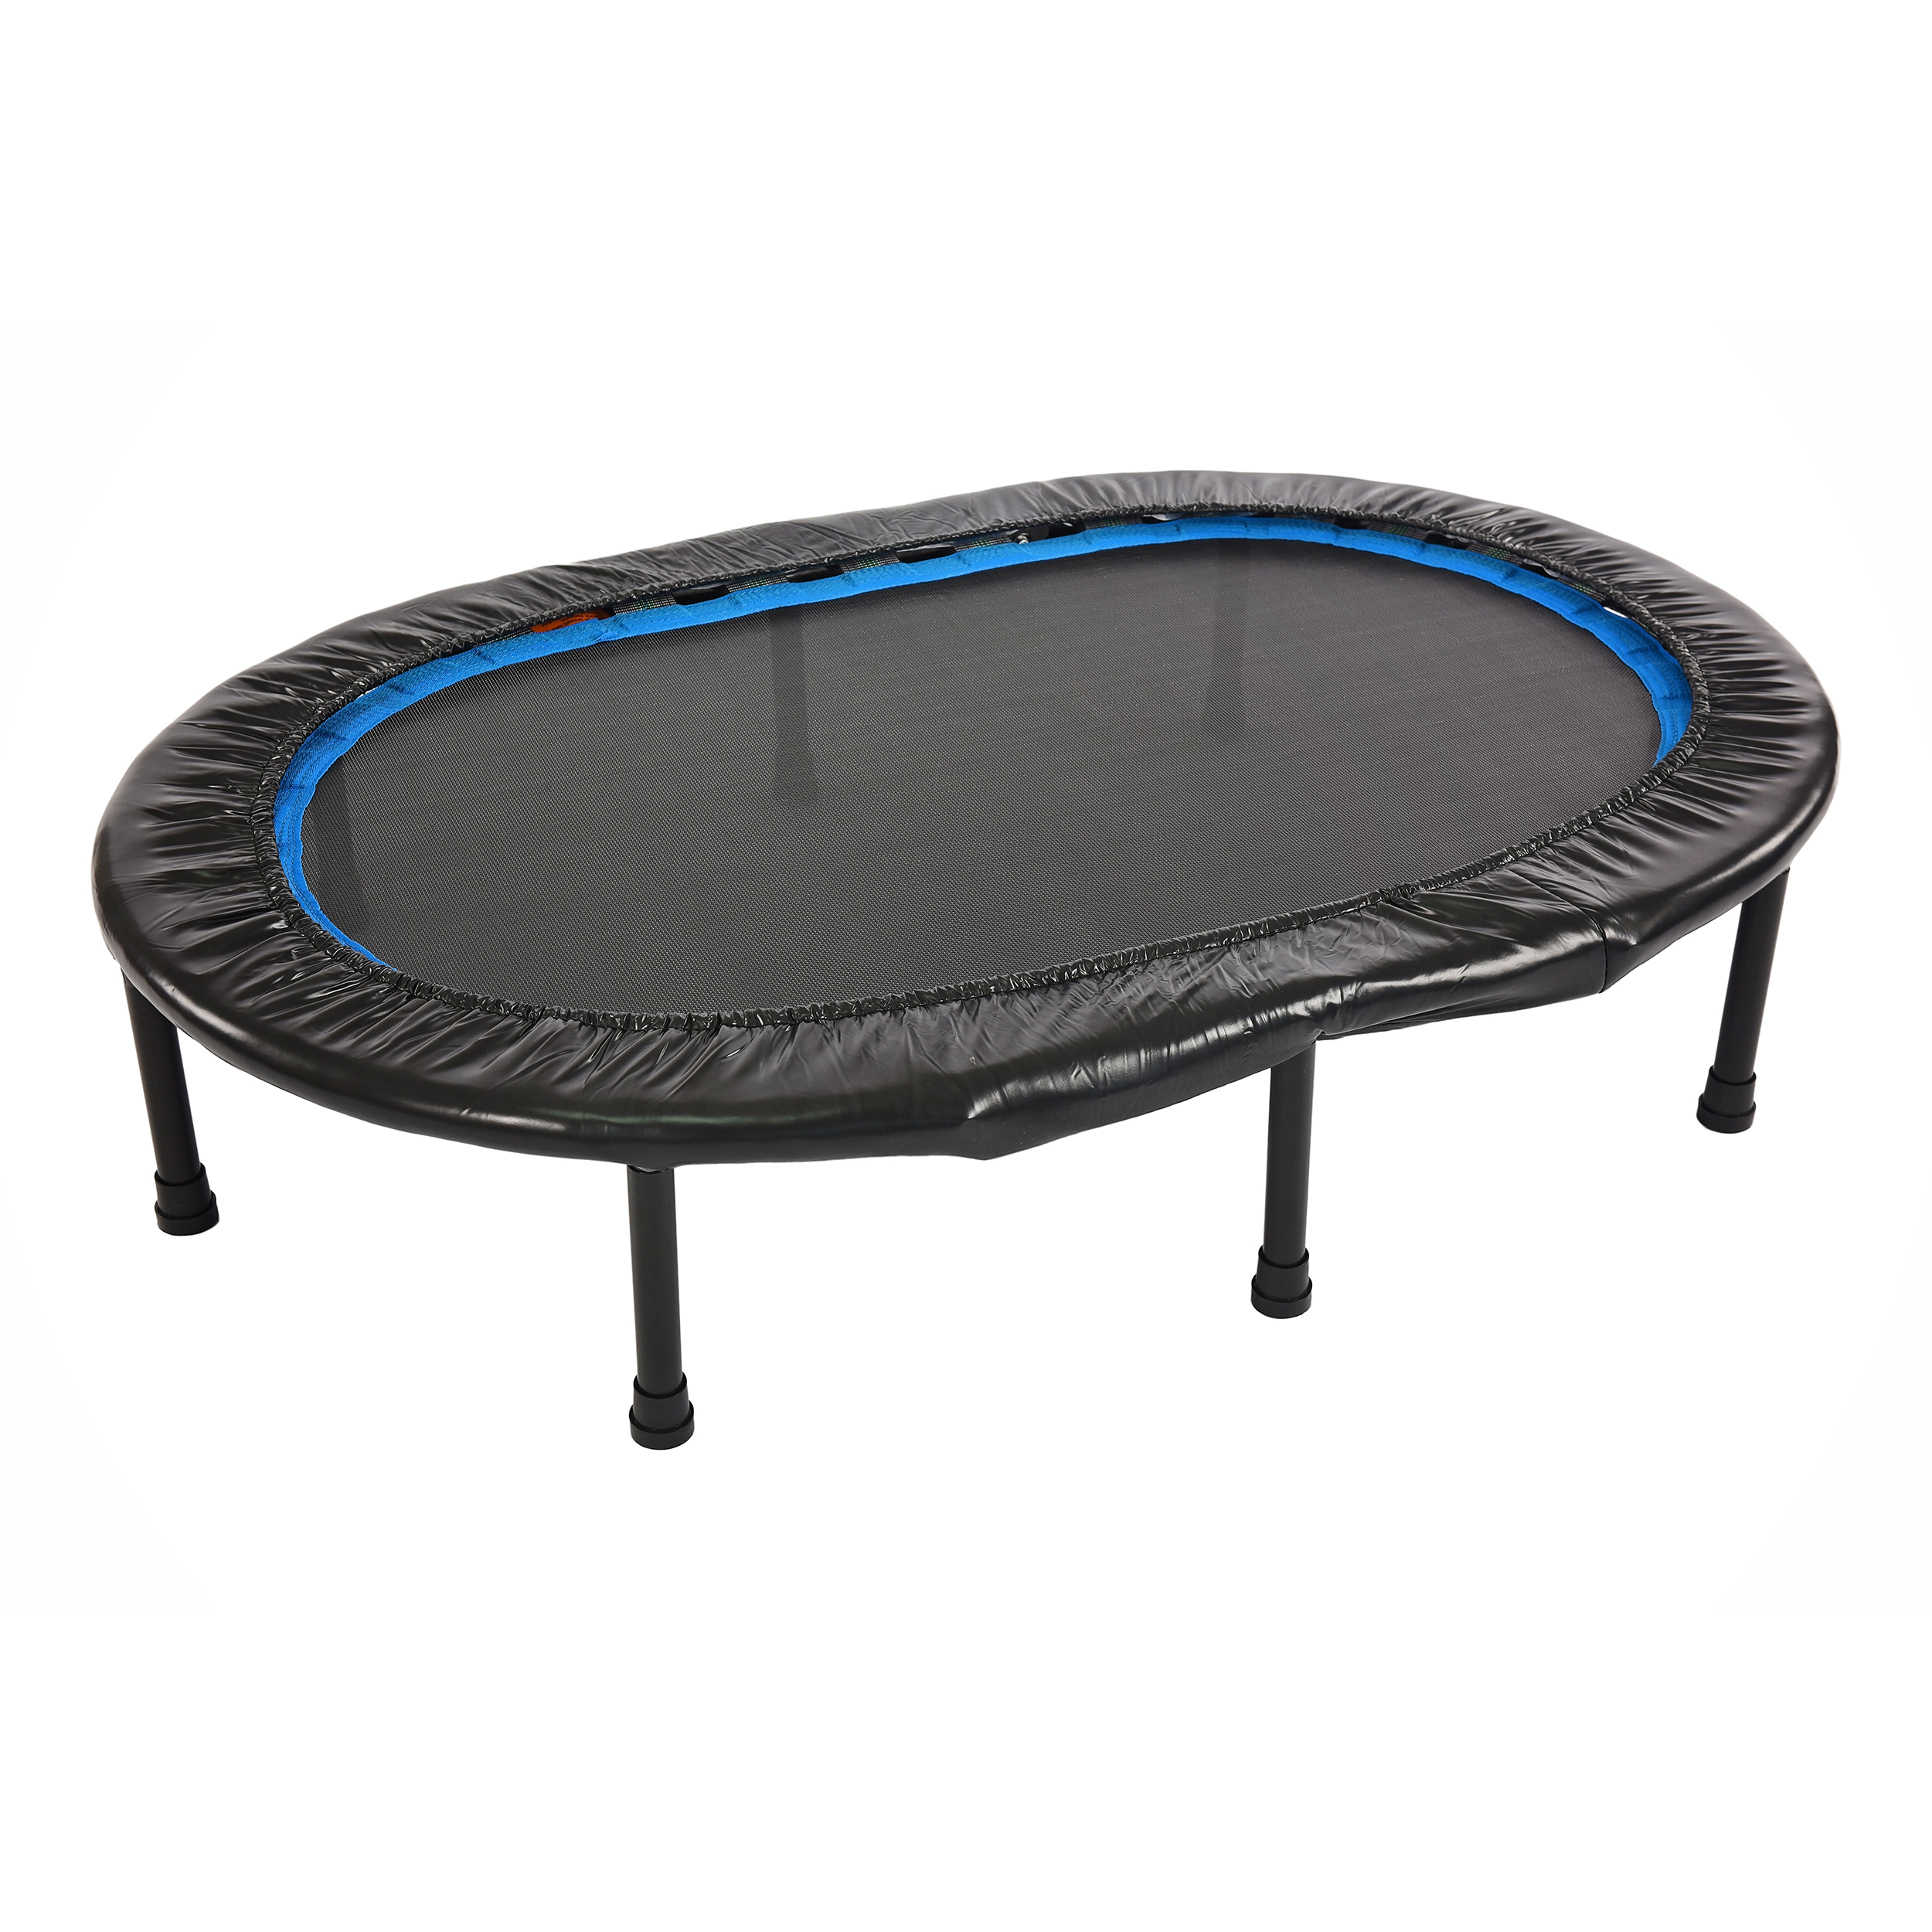 Stamina Oval Fitness Trampoline Product Photo home exercise equipment.